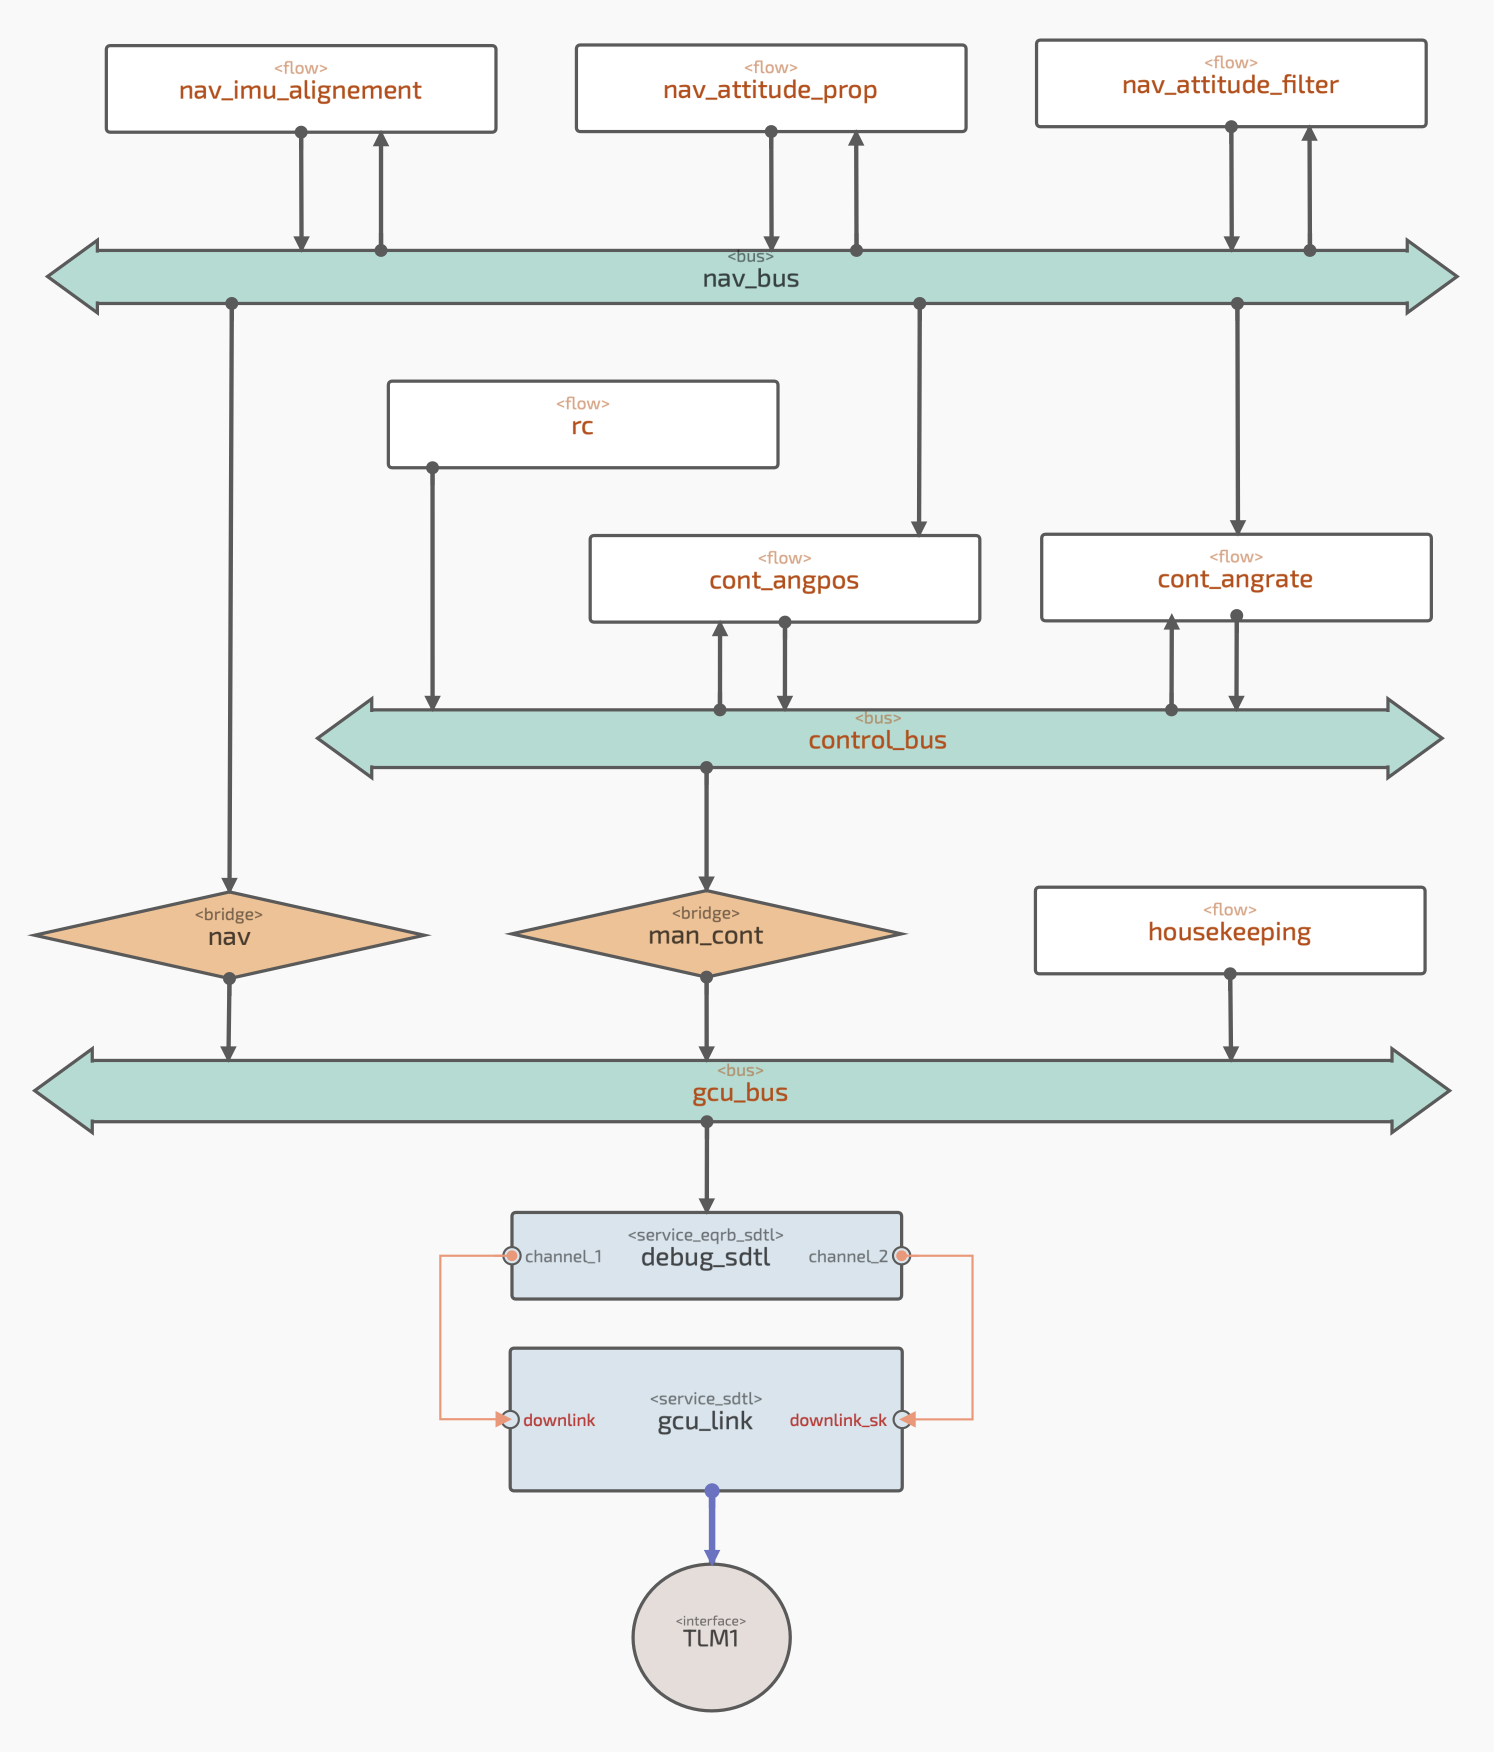 Example of visualized |SWSYS| diagram